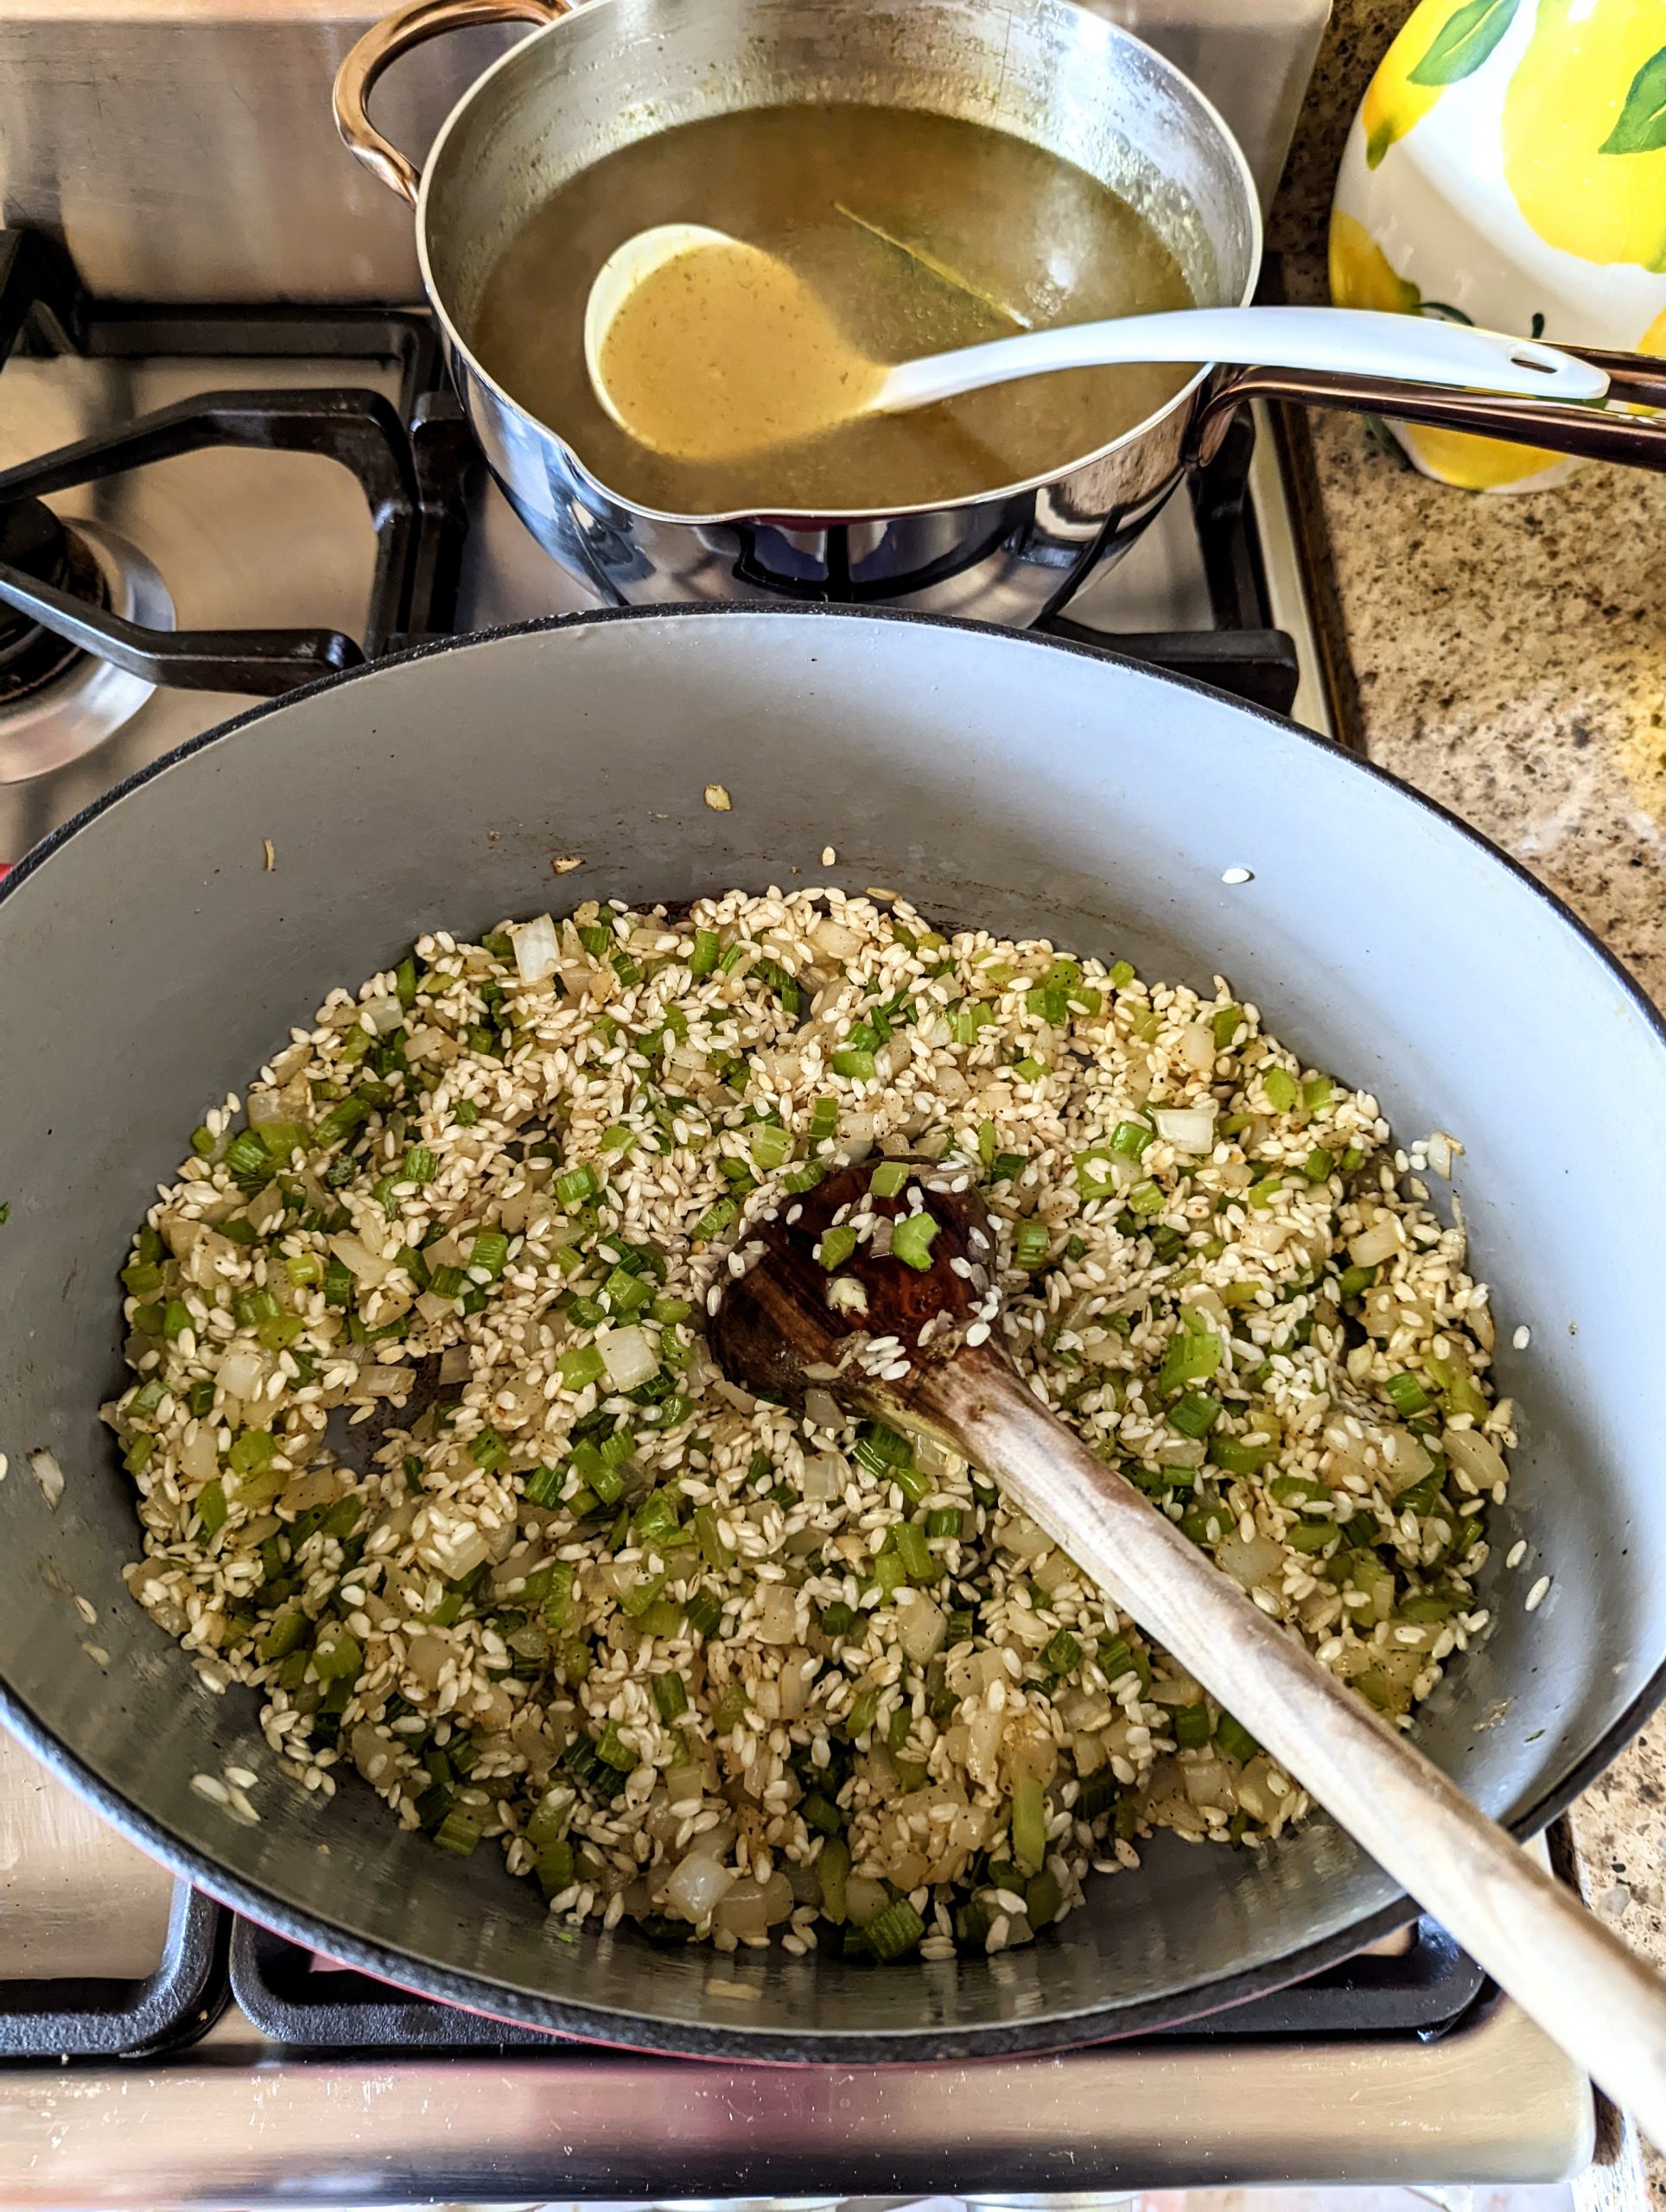 Toasting the arborio rice in the same Dutch oven with the celery and onion. A pot of hot chicken stock is warming on the burner behind it.